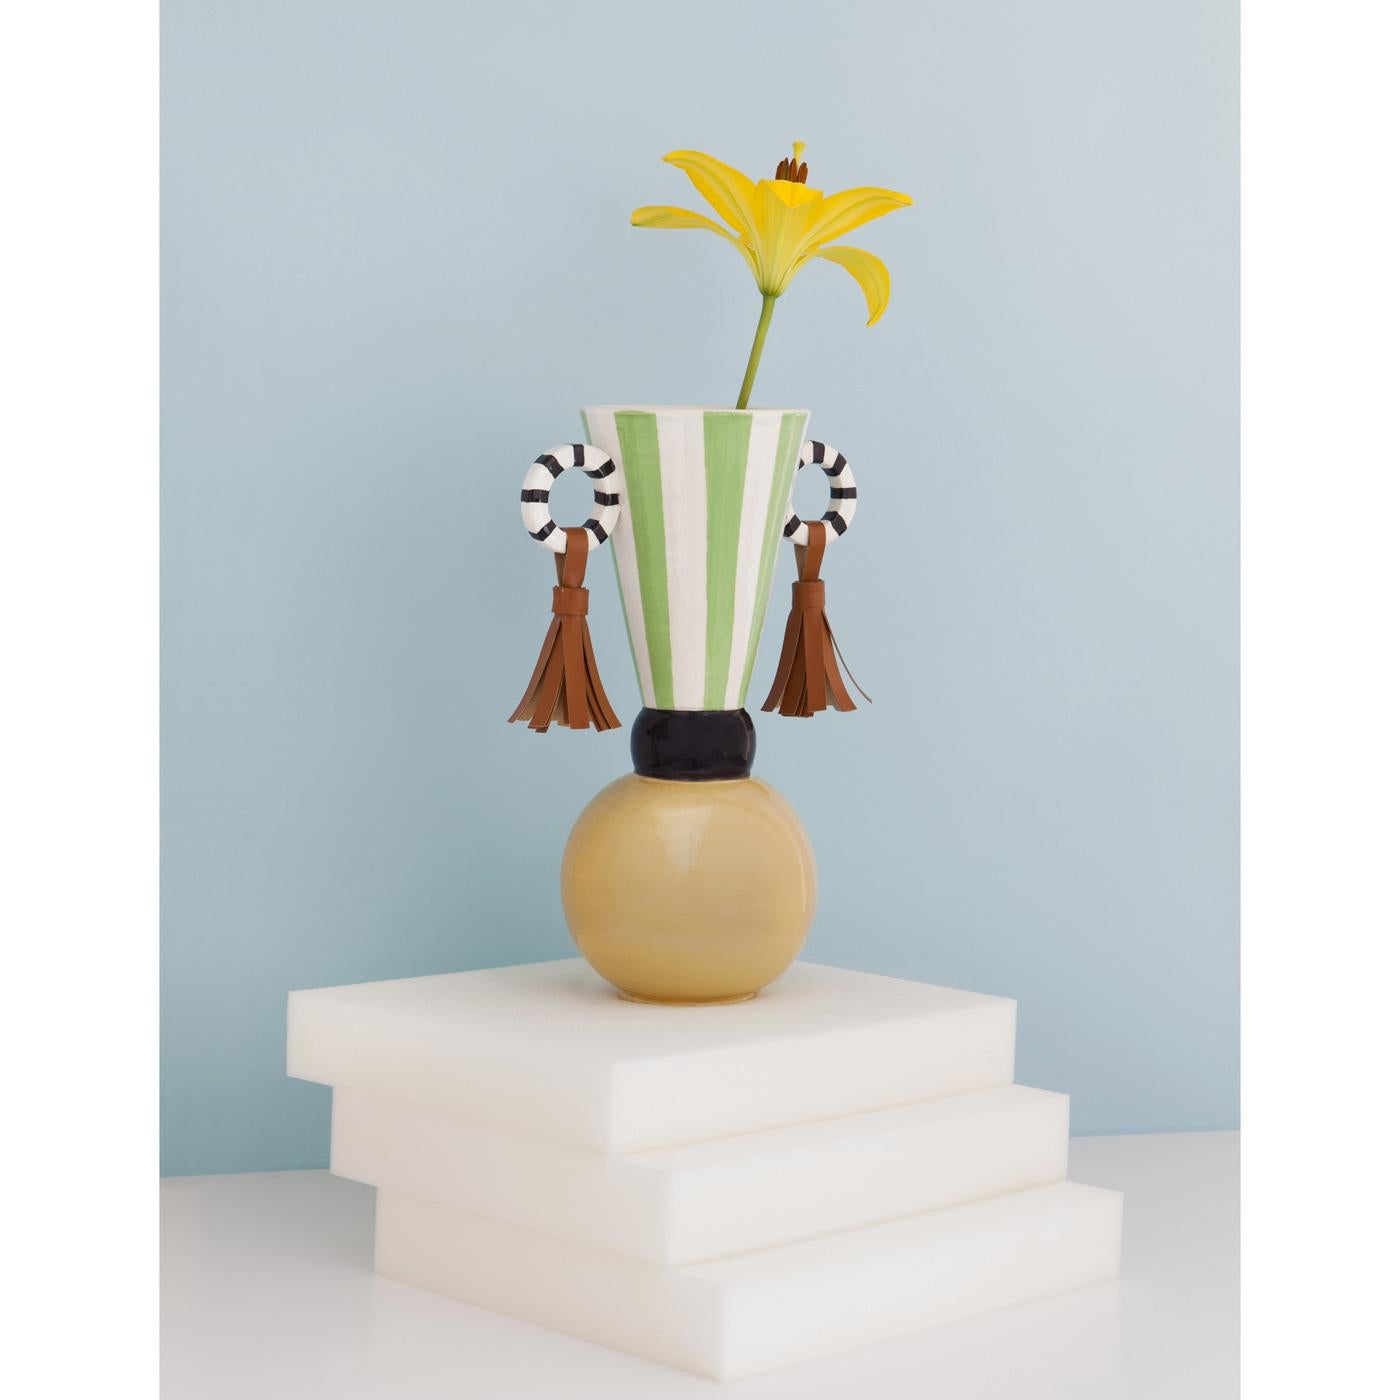 This striking vase is part of the Masai collection, inspired by the decorative elements of this African tribe that are interpreted in a modern way and exquisitely made into objects of functional decor. The ceramic body of this piece is handmade and